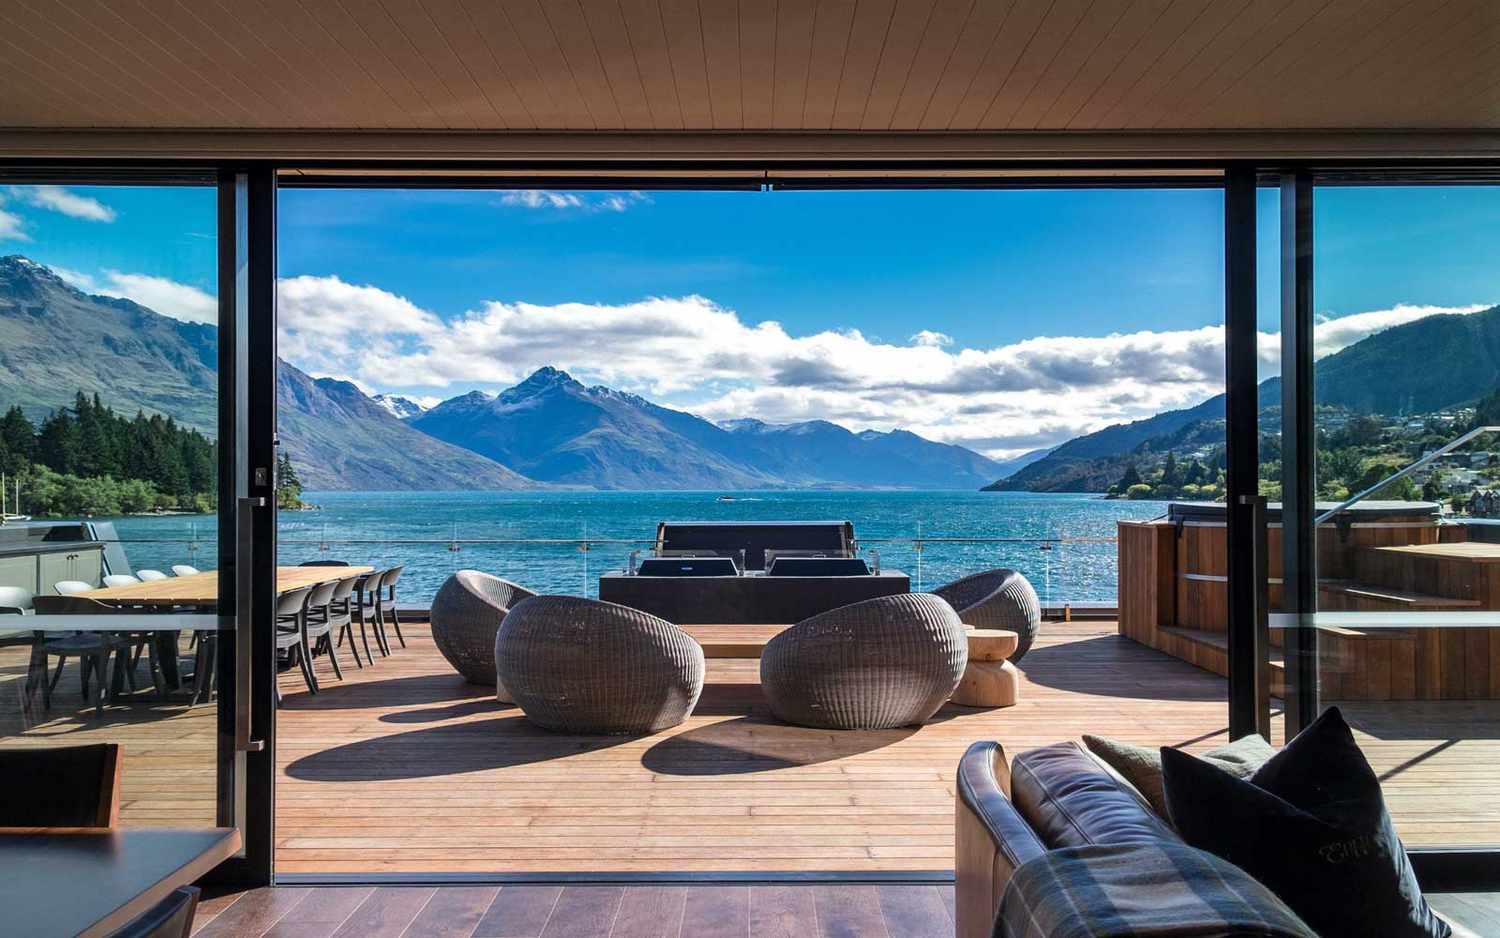 Staycation at a Boutique Hotel in Queenstown